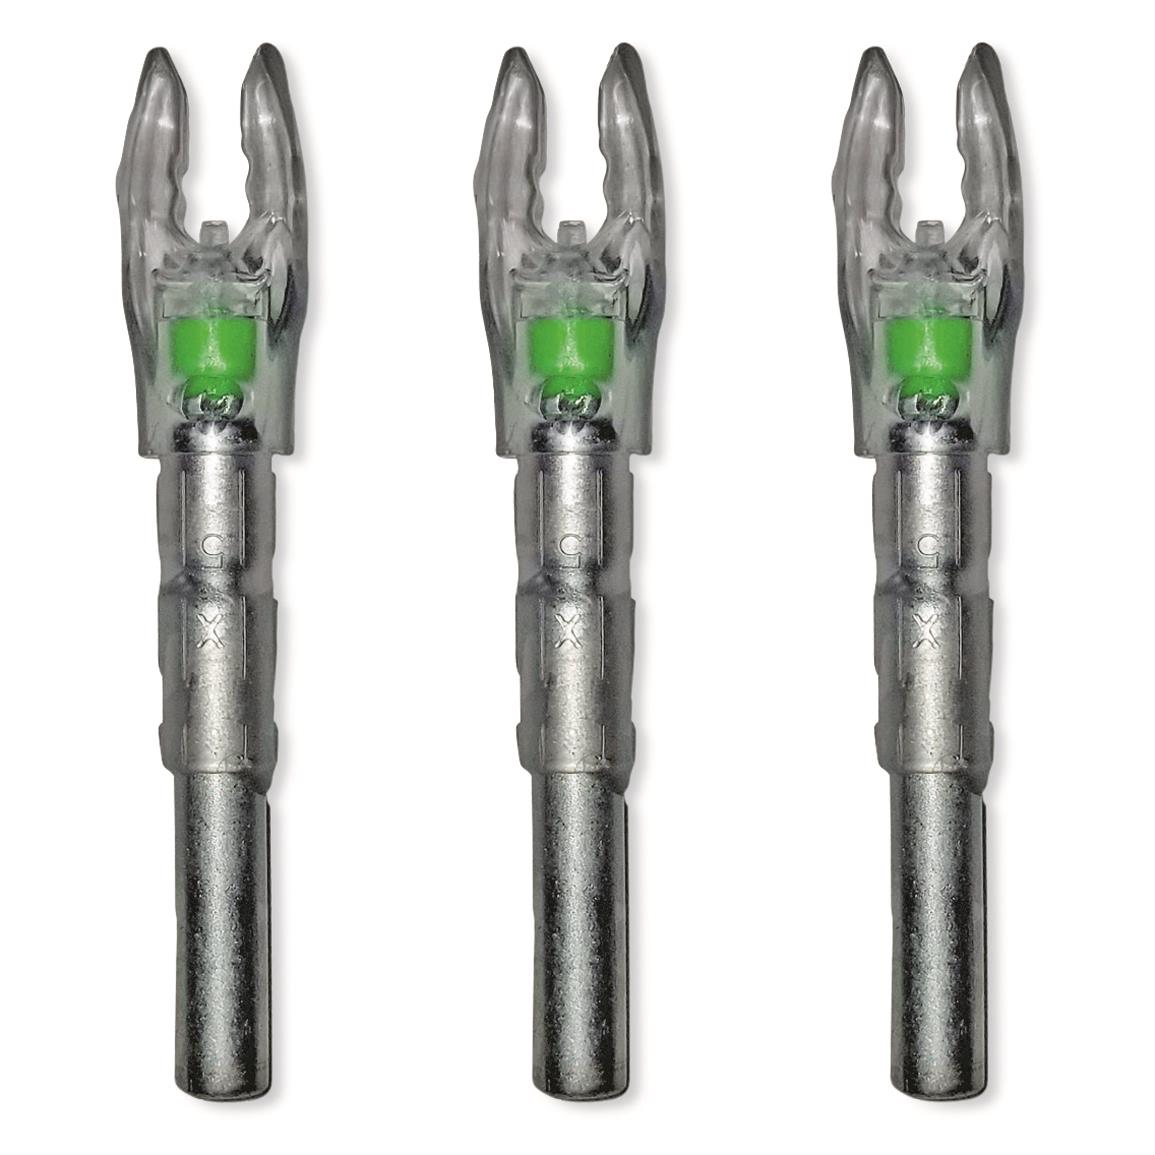 Muzzy Green Lighted Nocks for Carbon Composite Fish Arrows, 3 Pack